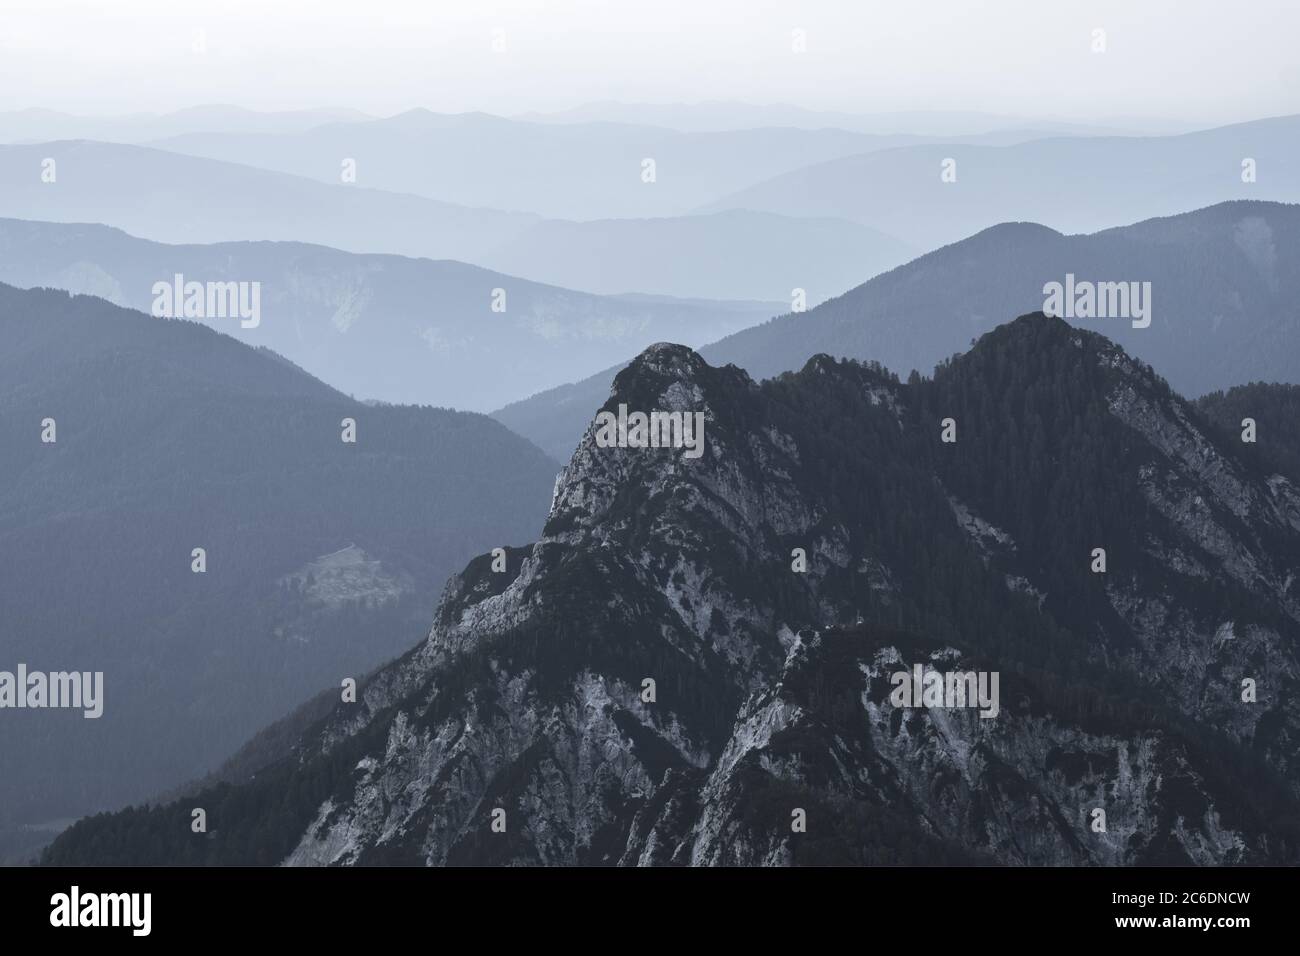 Spectacular view of grey mountain ranges silhouettes and fog in valleys.  Julian Alps, Triglav National Park, Slovenia. View from Mountain Slemenova  Stock Photo - Alamy